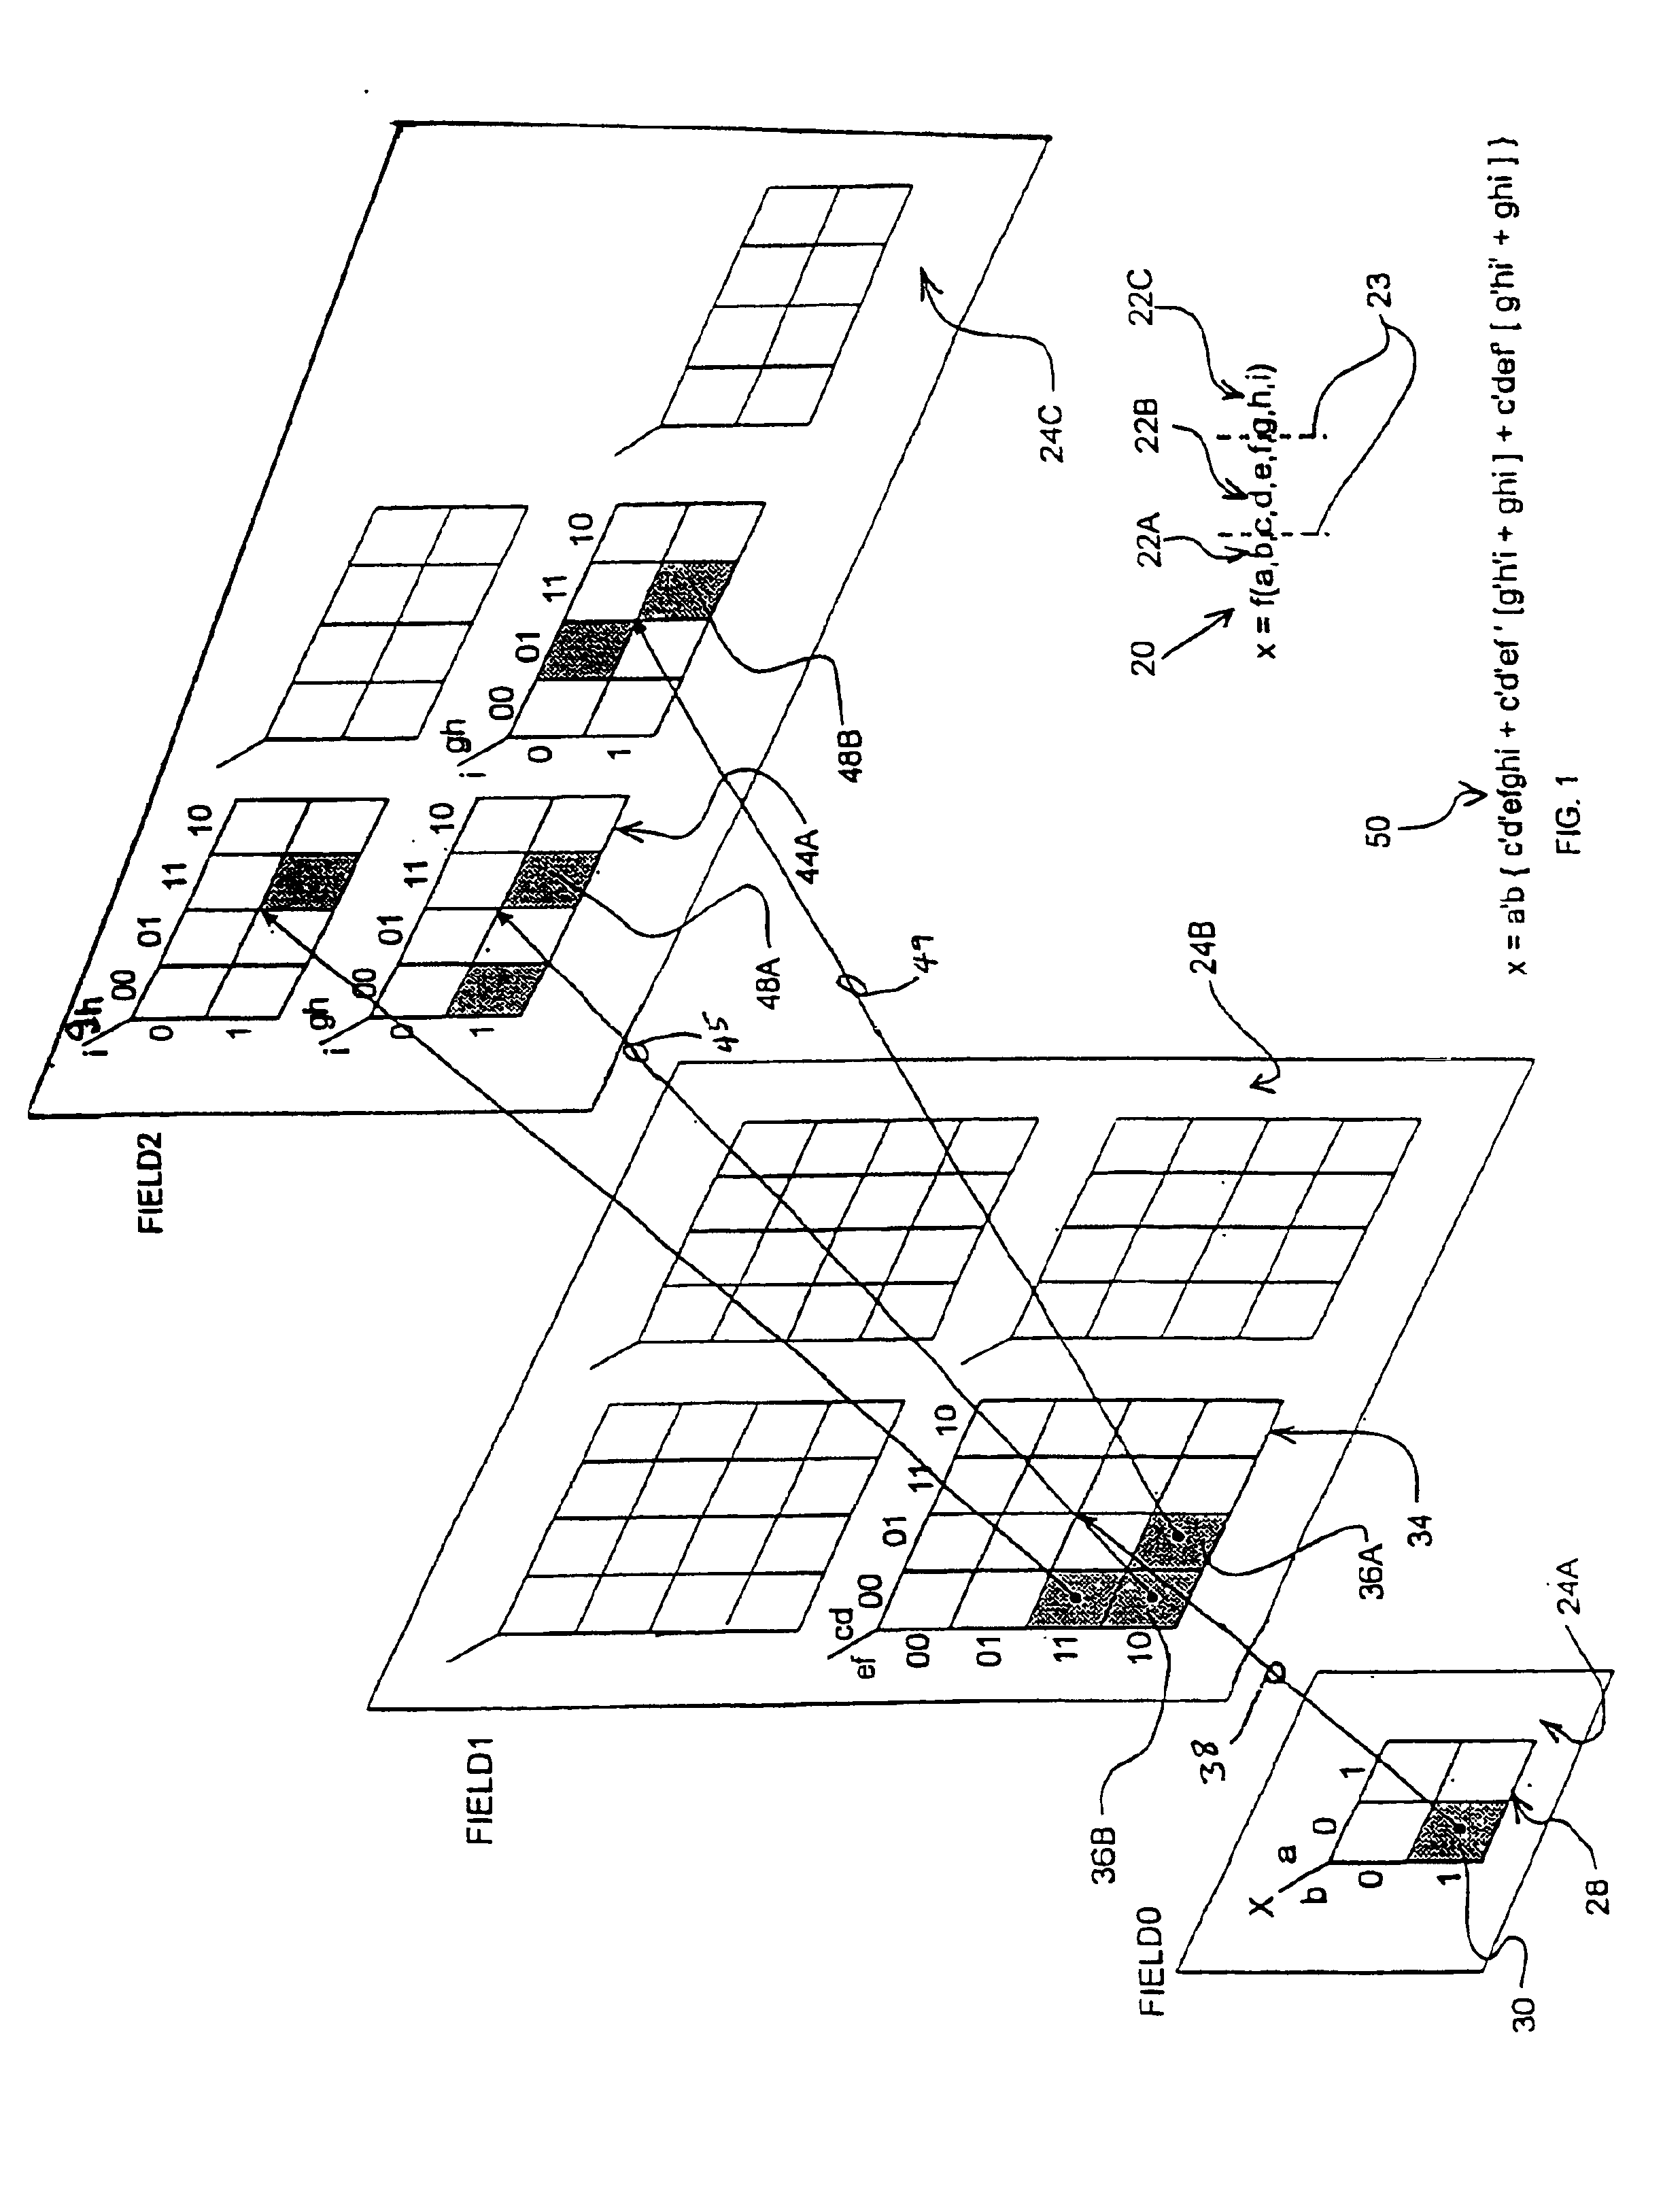 System for aiding in the design of combinatorial logic and sequential state machines